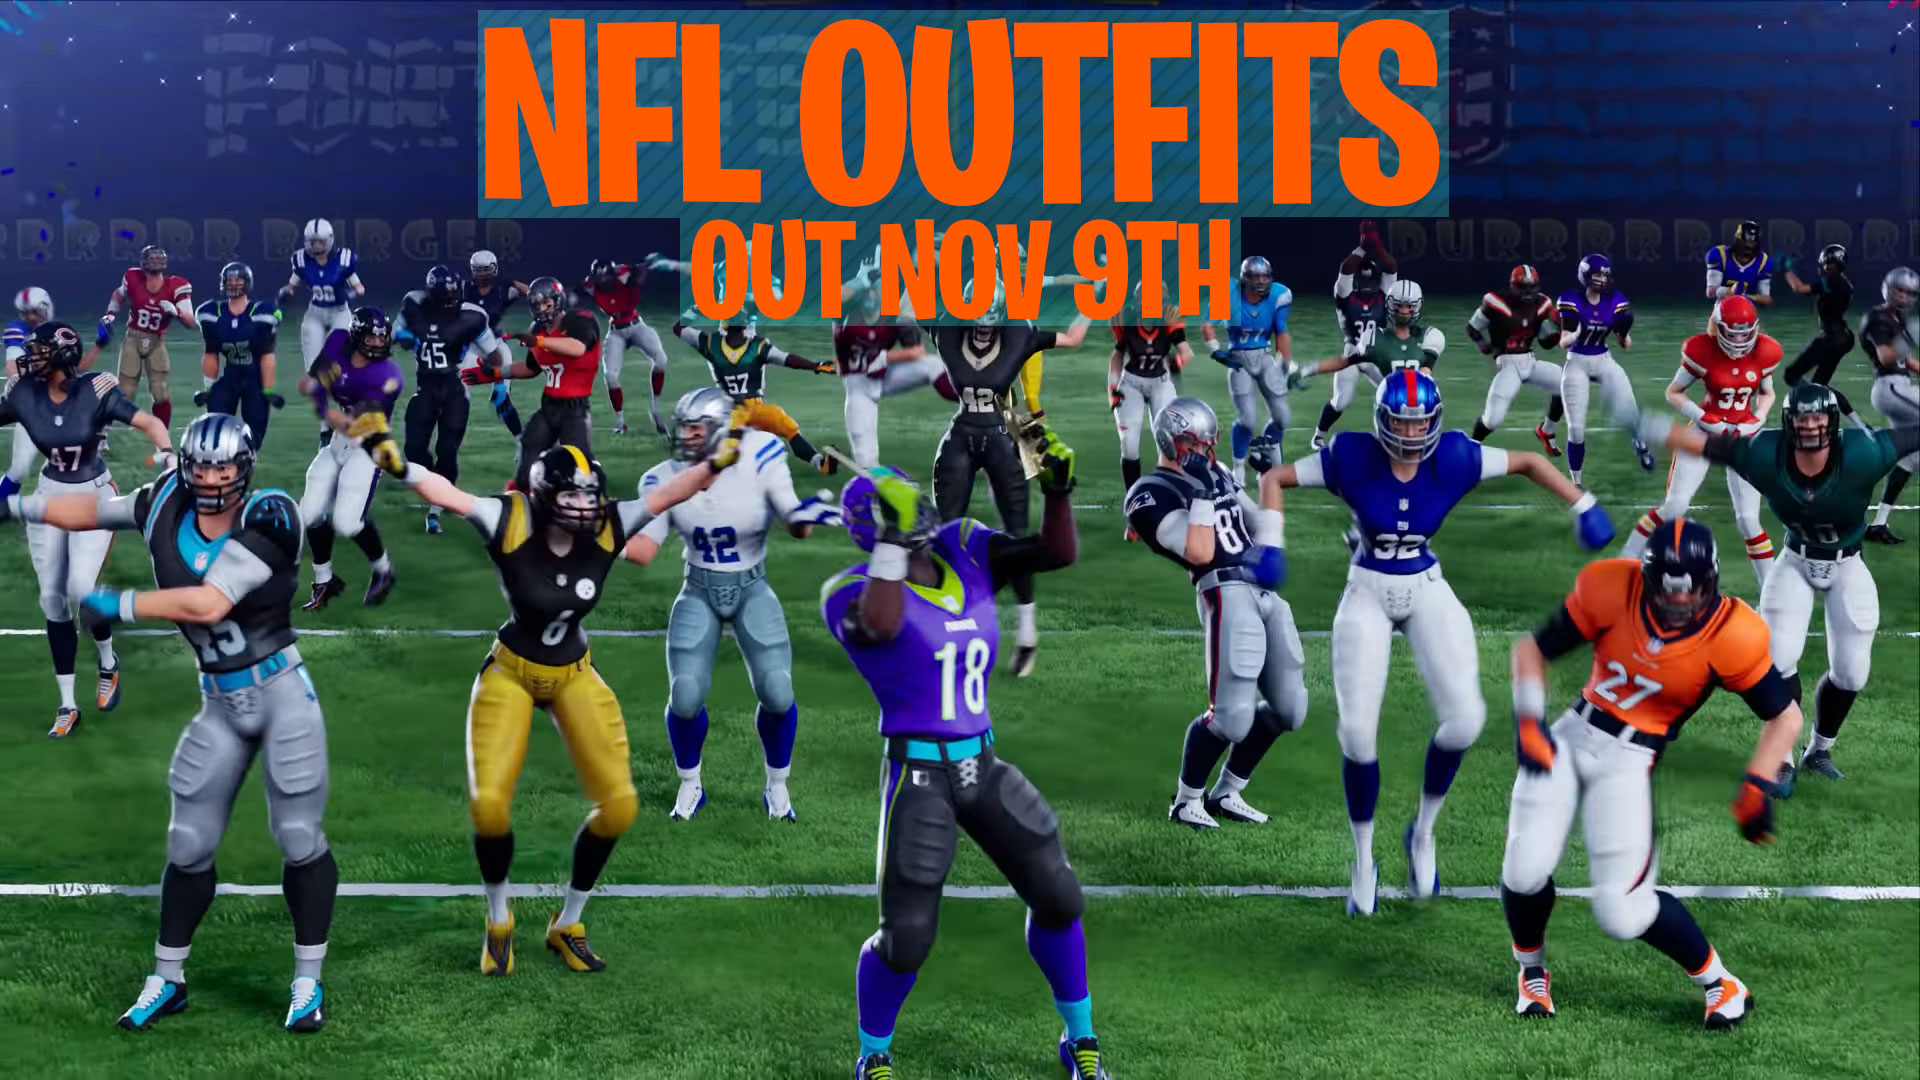 Fortnite NFL outfits coming to the item store   Fortnite News